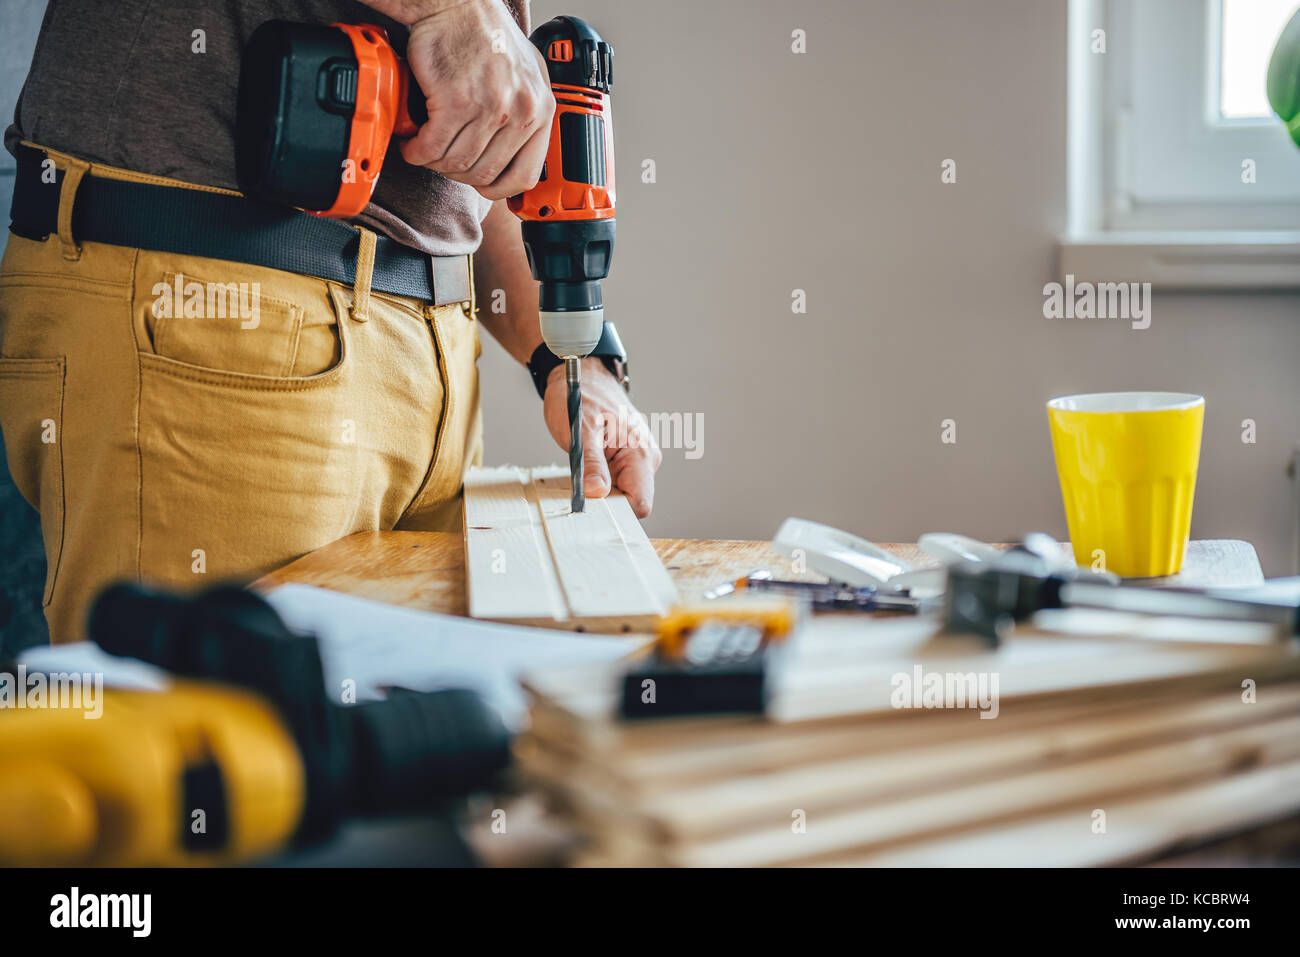 Man drilling wood with cordless drill on the table at home Stock Photo